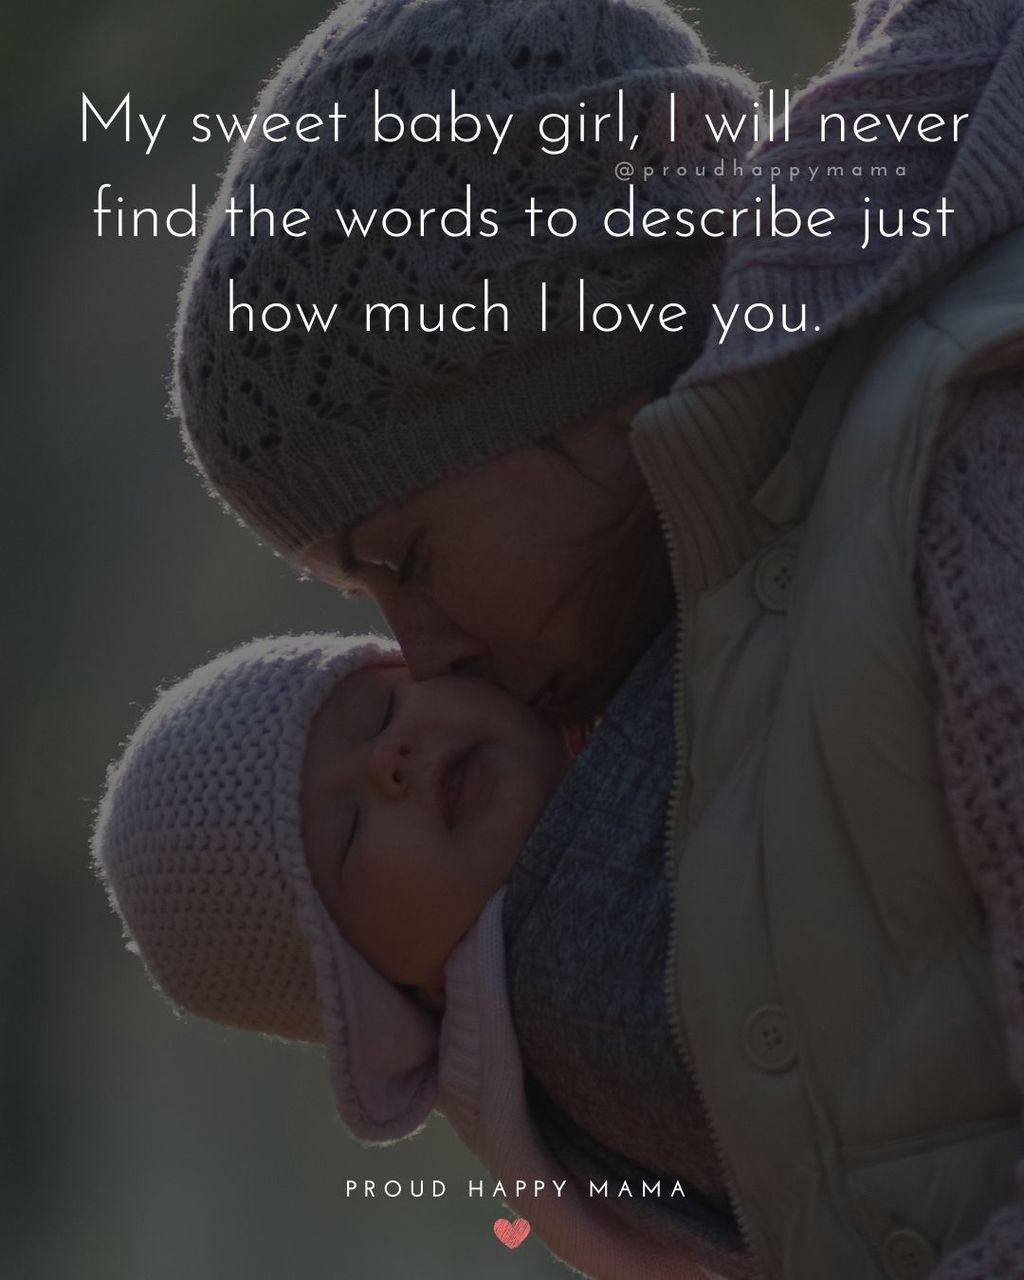 Baby Girl Quotes - My sweet baby girl, I will never find the words to describe just how much I love you.